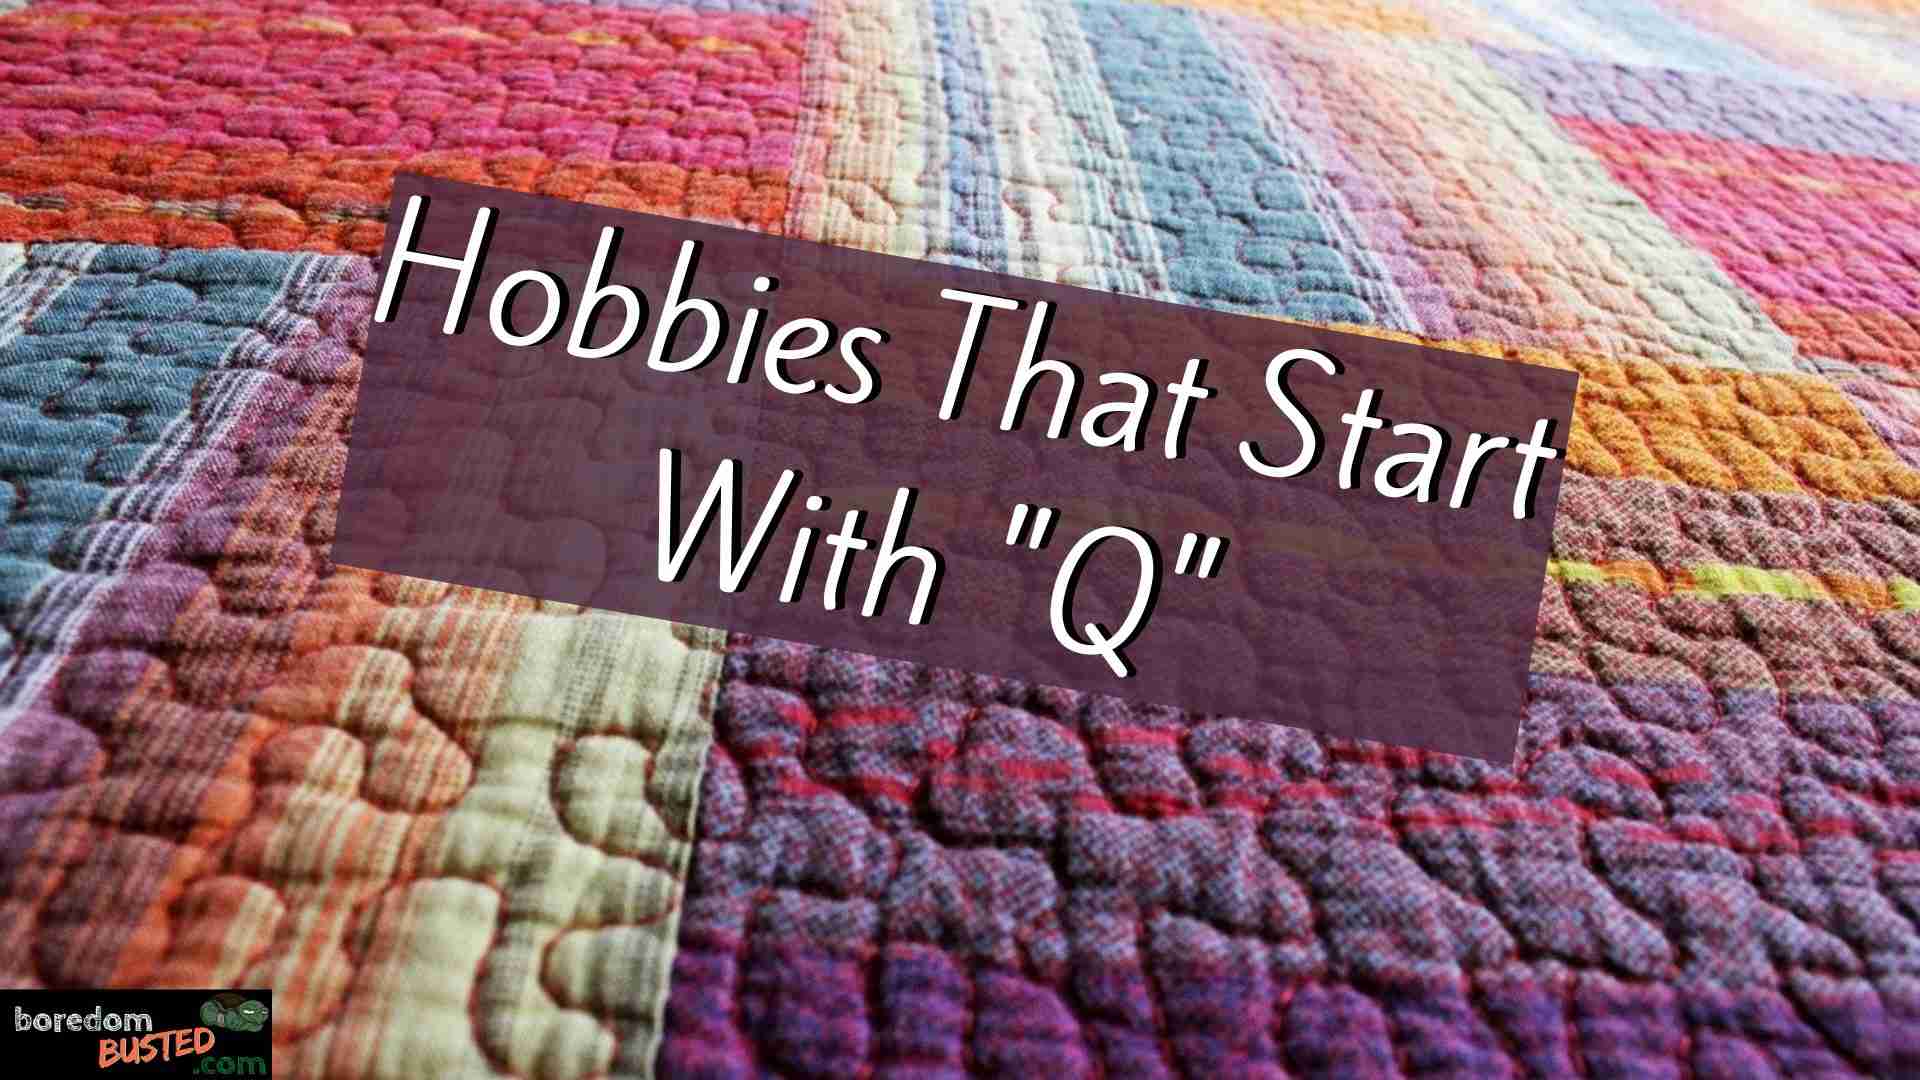 Hobbies that Start with Q, multicolored quilt